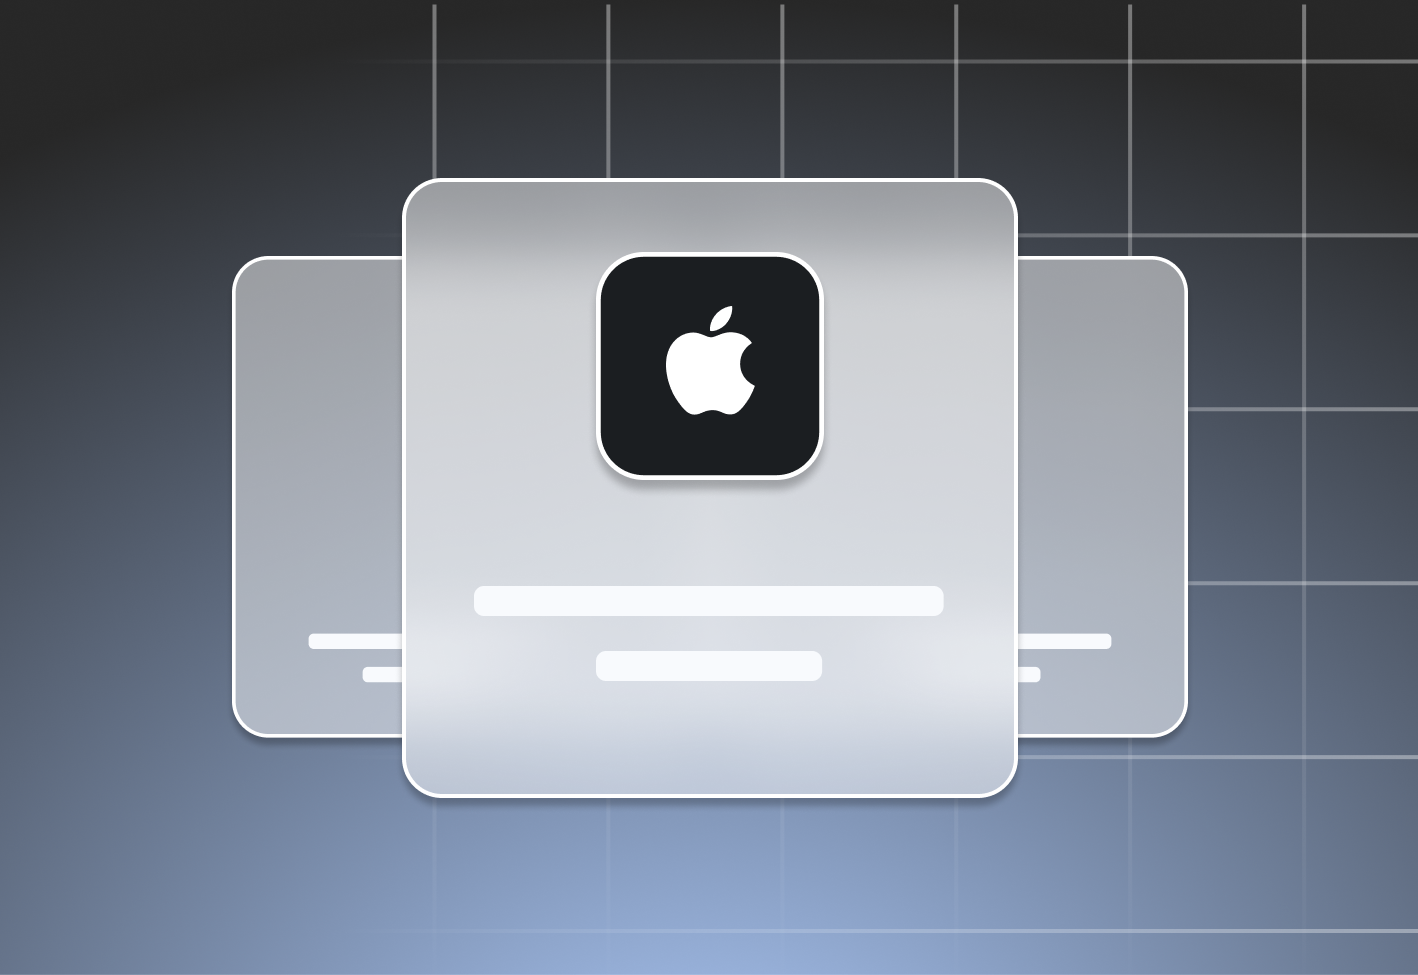 Apple logo on a gray background